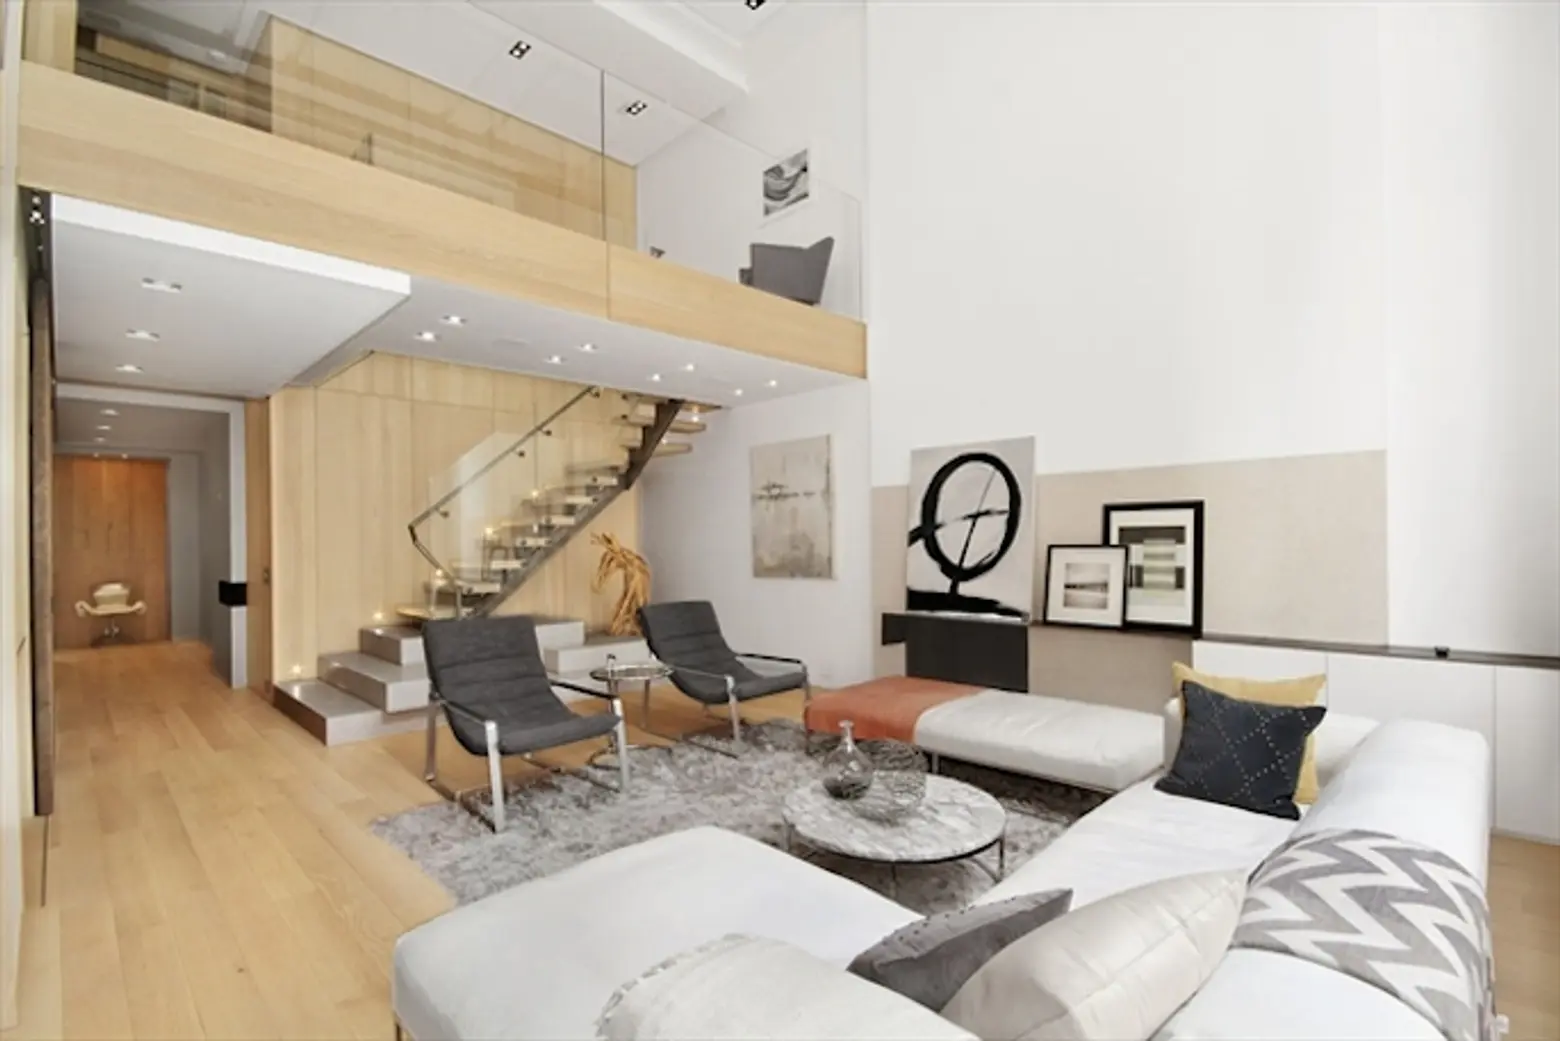 Sleek $8.5M Central Park West Pad Returns Asking Twice the Price